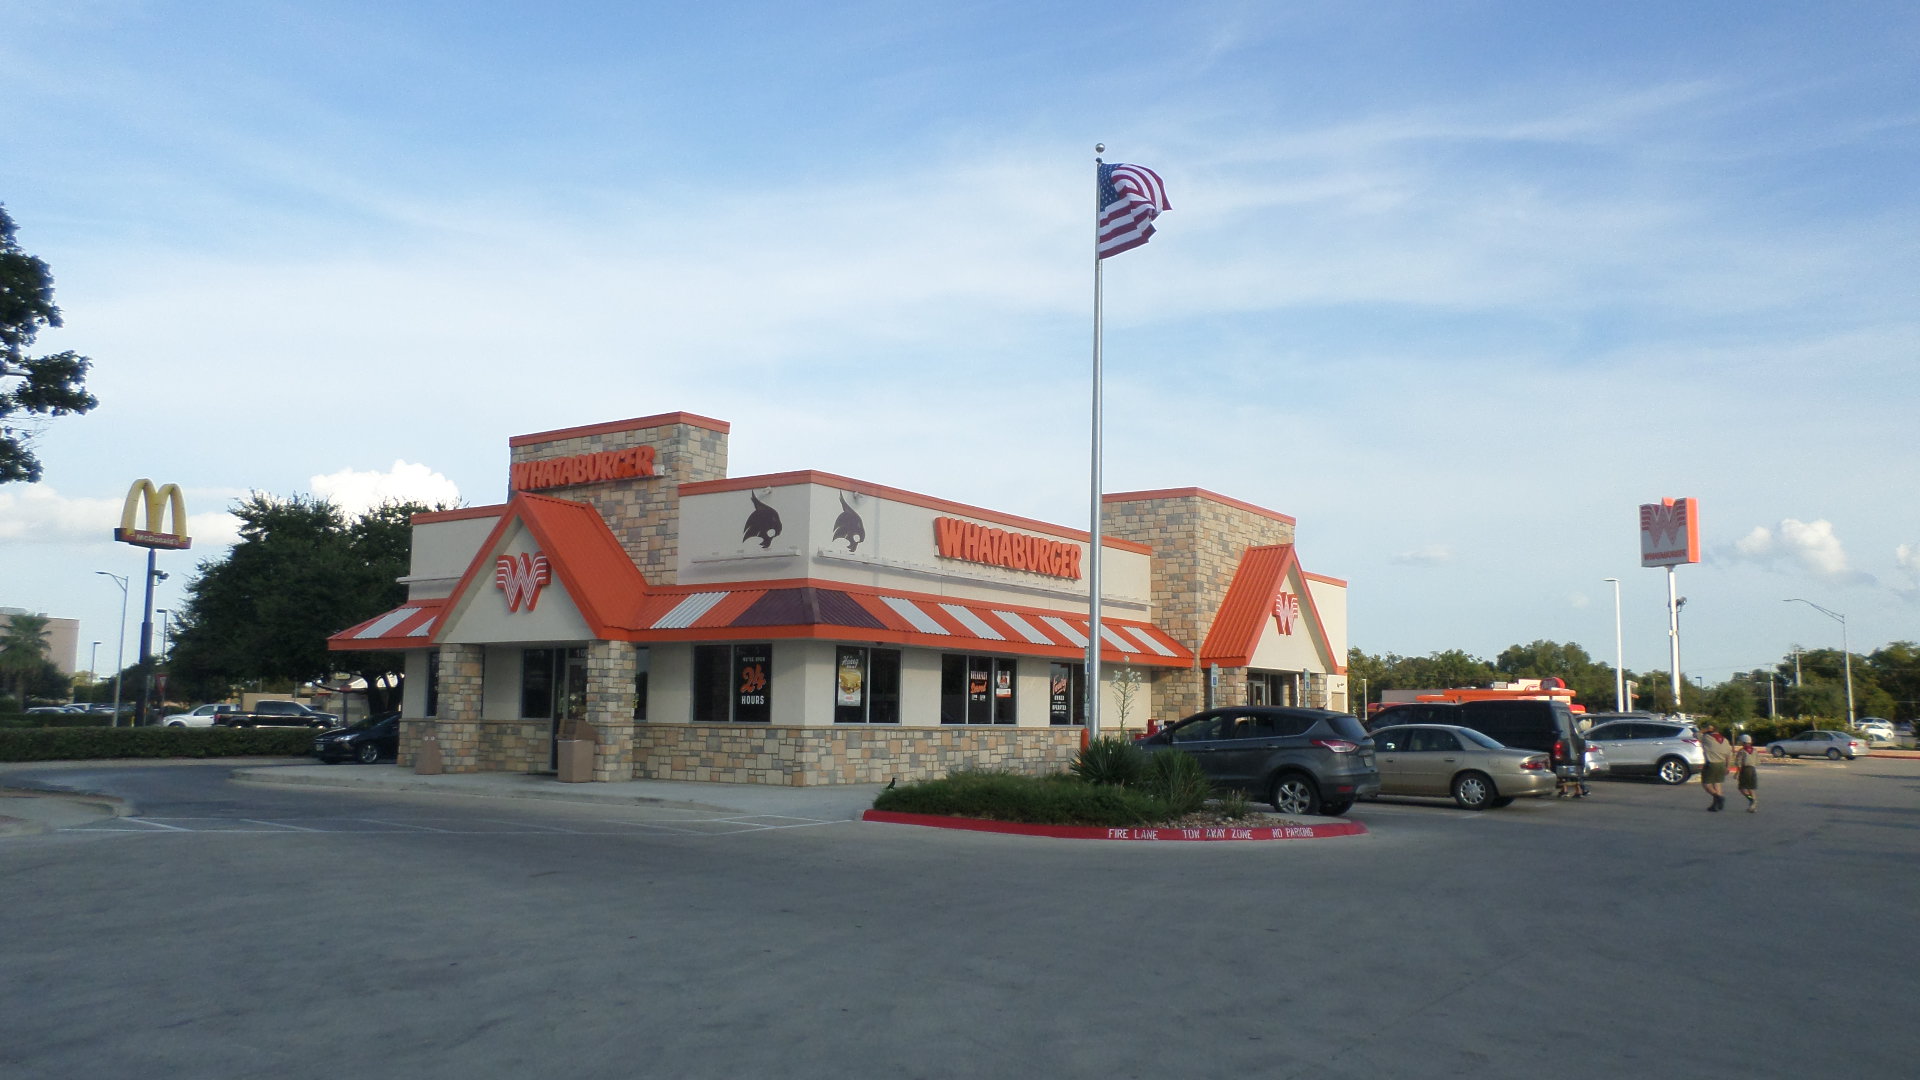 The Whataburger located off of I-35 and Redwood is one of the most profitable Whataburger's in Texas. Photo by Austin Cowan.